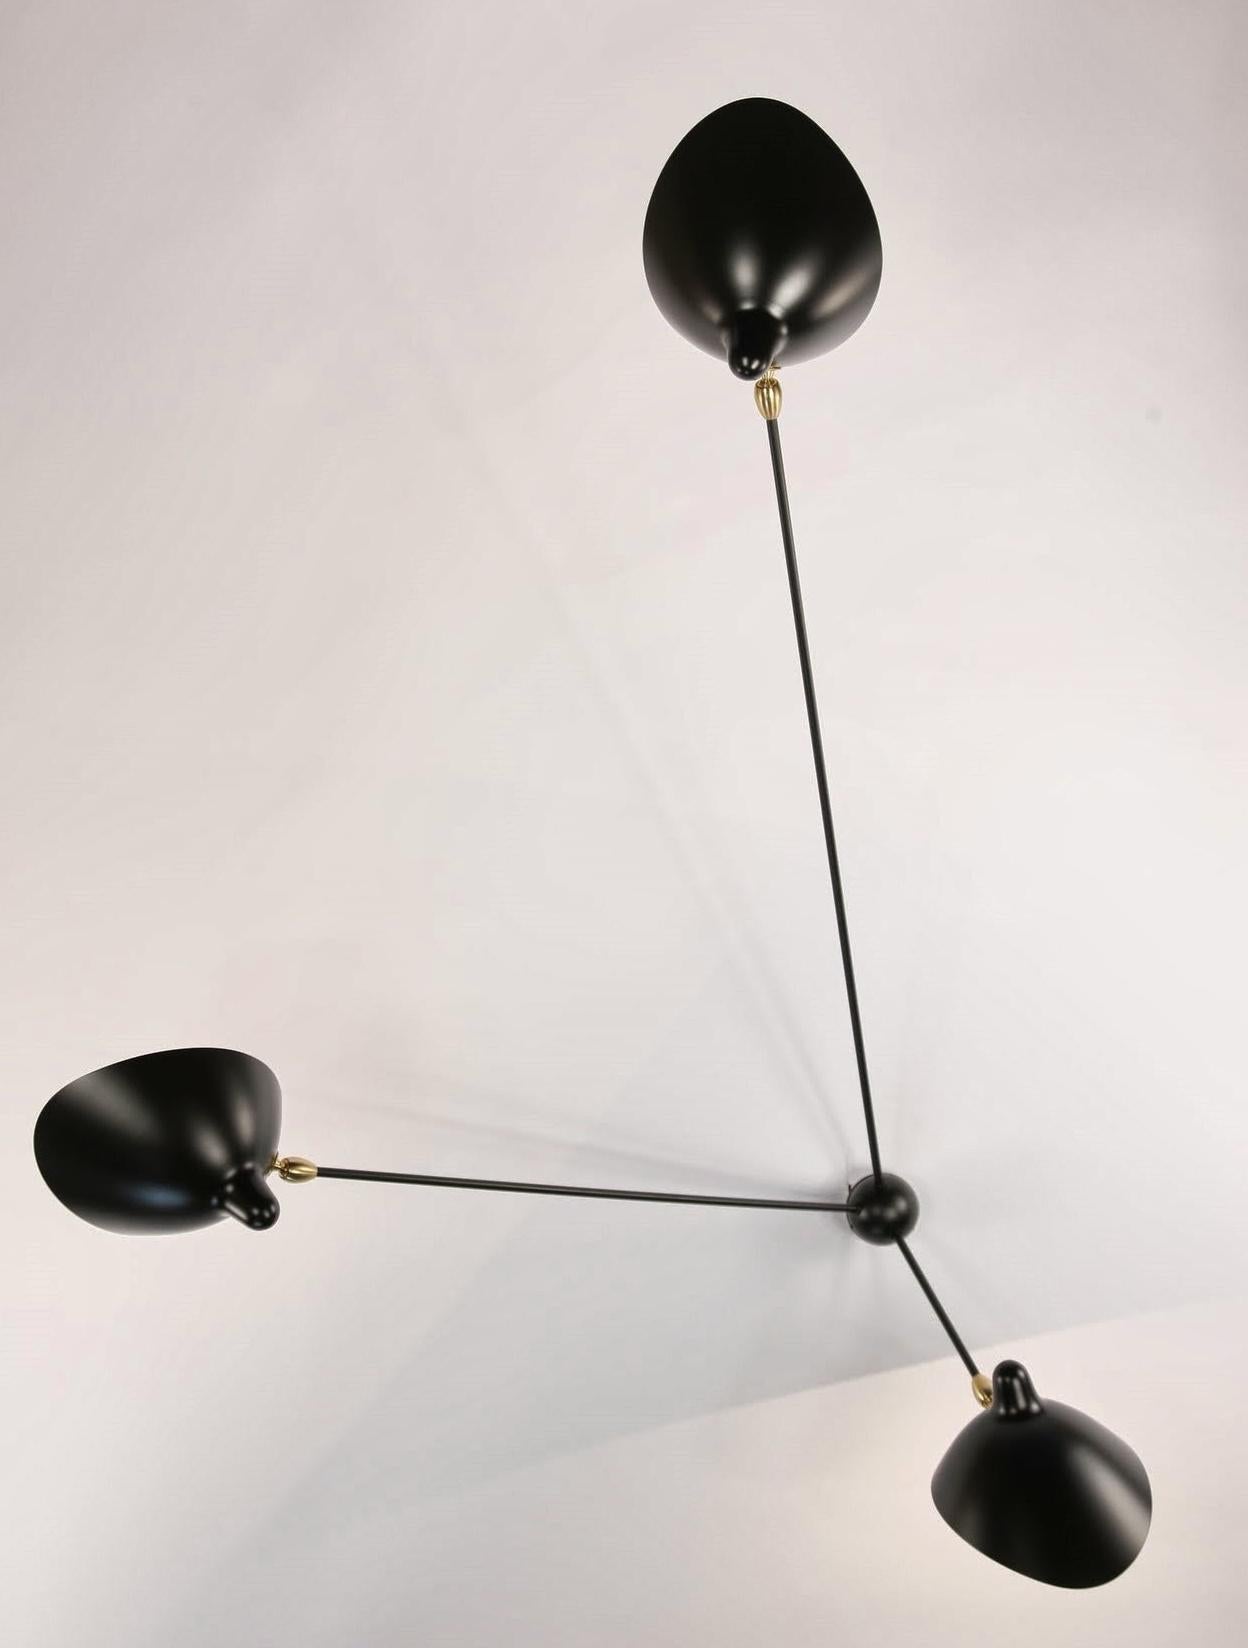 With three stationary arms projecting from the central mount into the room, this lamp becomes a reference point while illuminating the surroundings. Each lamp head tilts and revolves.   Brass fittings.

DIMENSIONS SPIDER SCONCE 3 ARMS
Arms’ Lengths